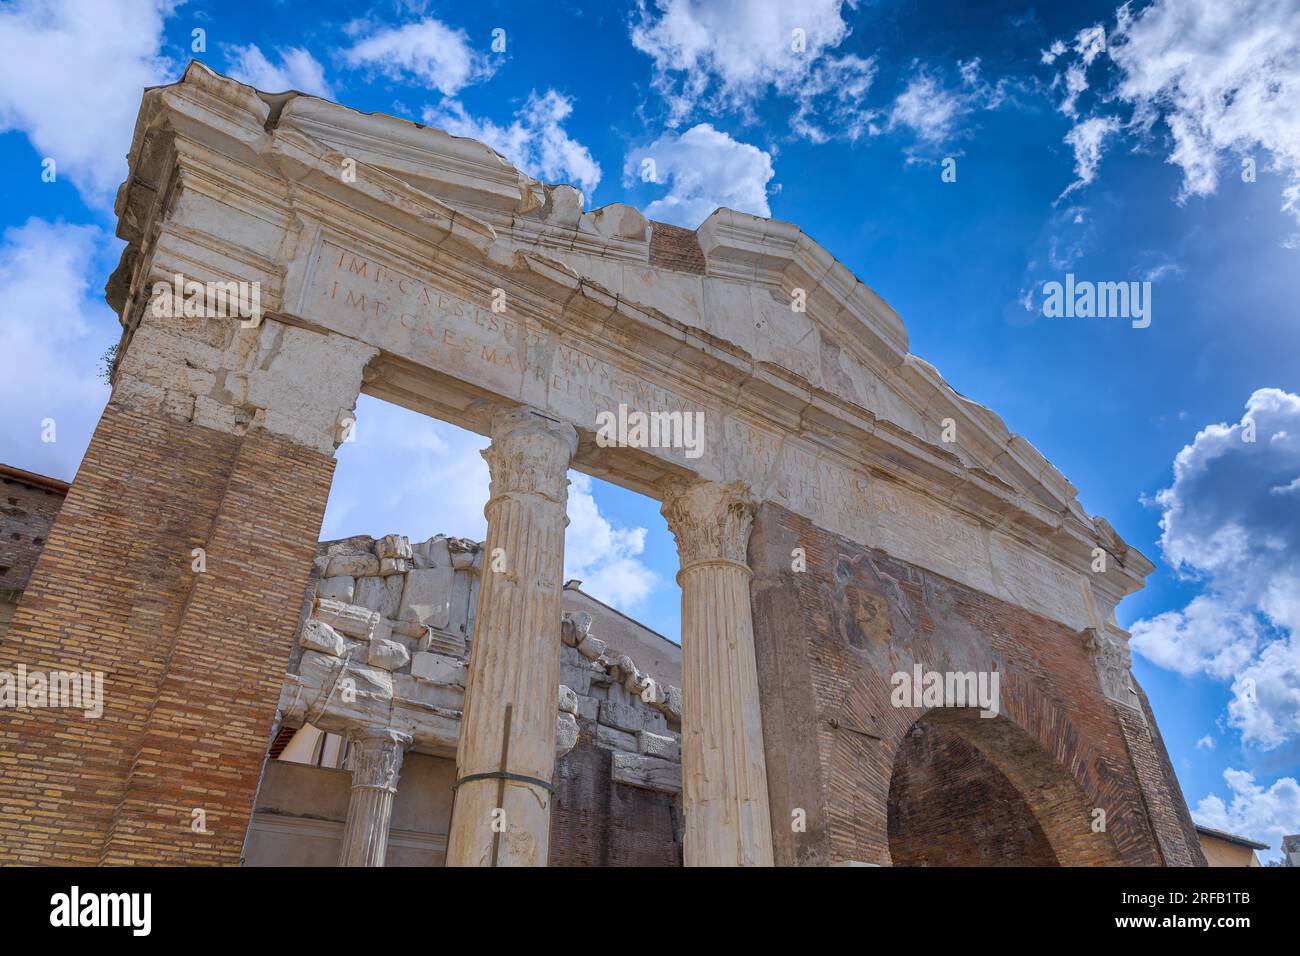 The Porticus Octaviae Ruins in the Heart of Rome, Italy. Stock Photo